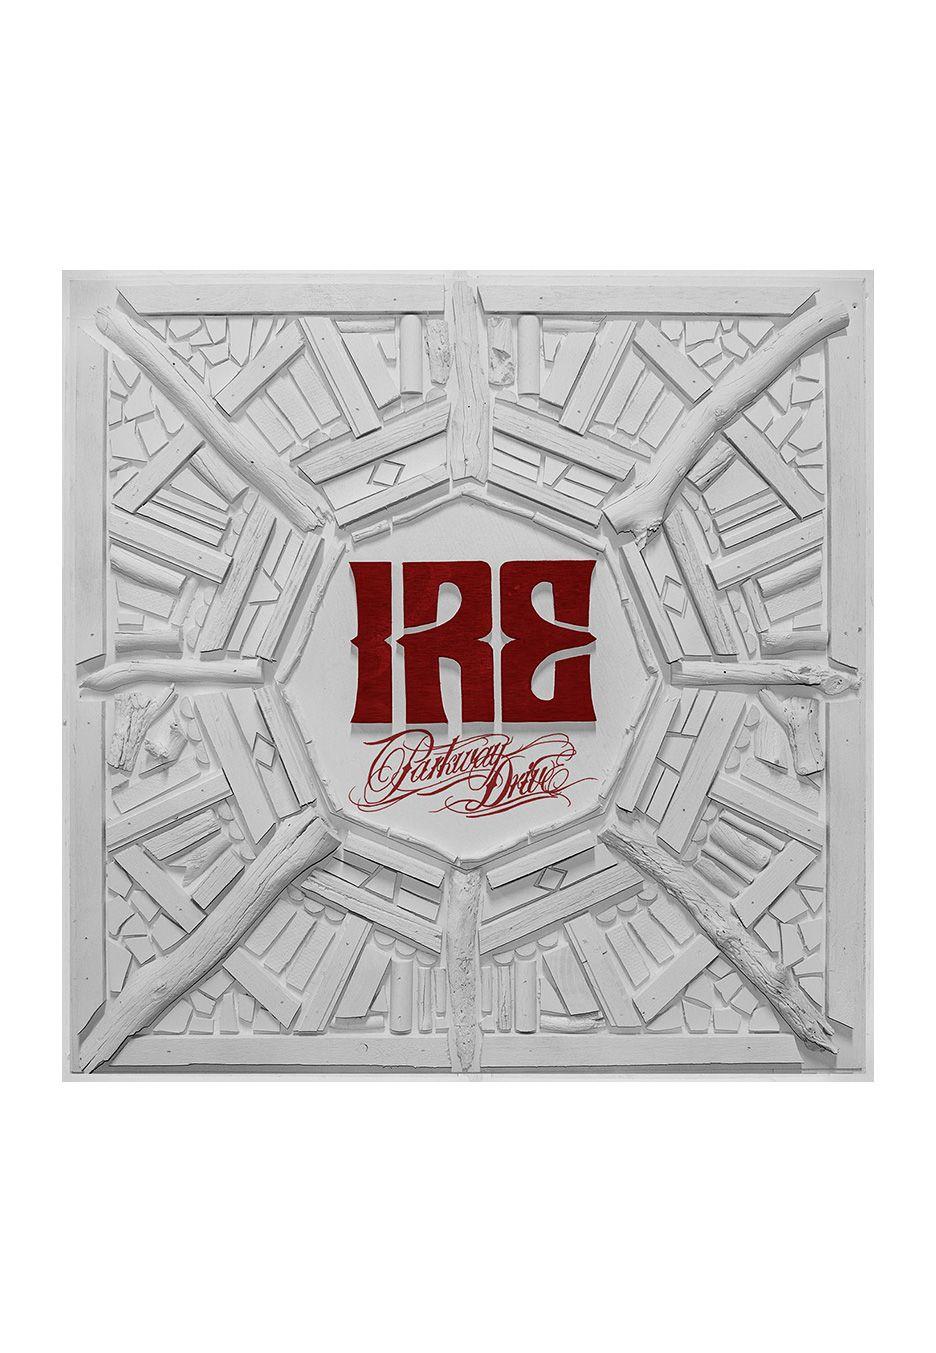 Parkway Drive Ire Logo - Parkway Drive - Ire - Deluxe Box - CDs, Vinyl and DVDs of your ...